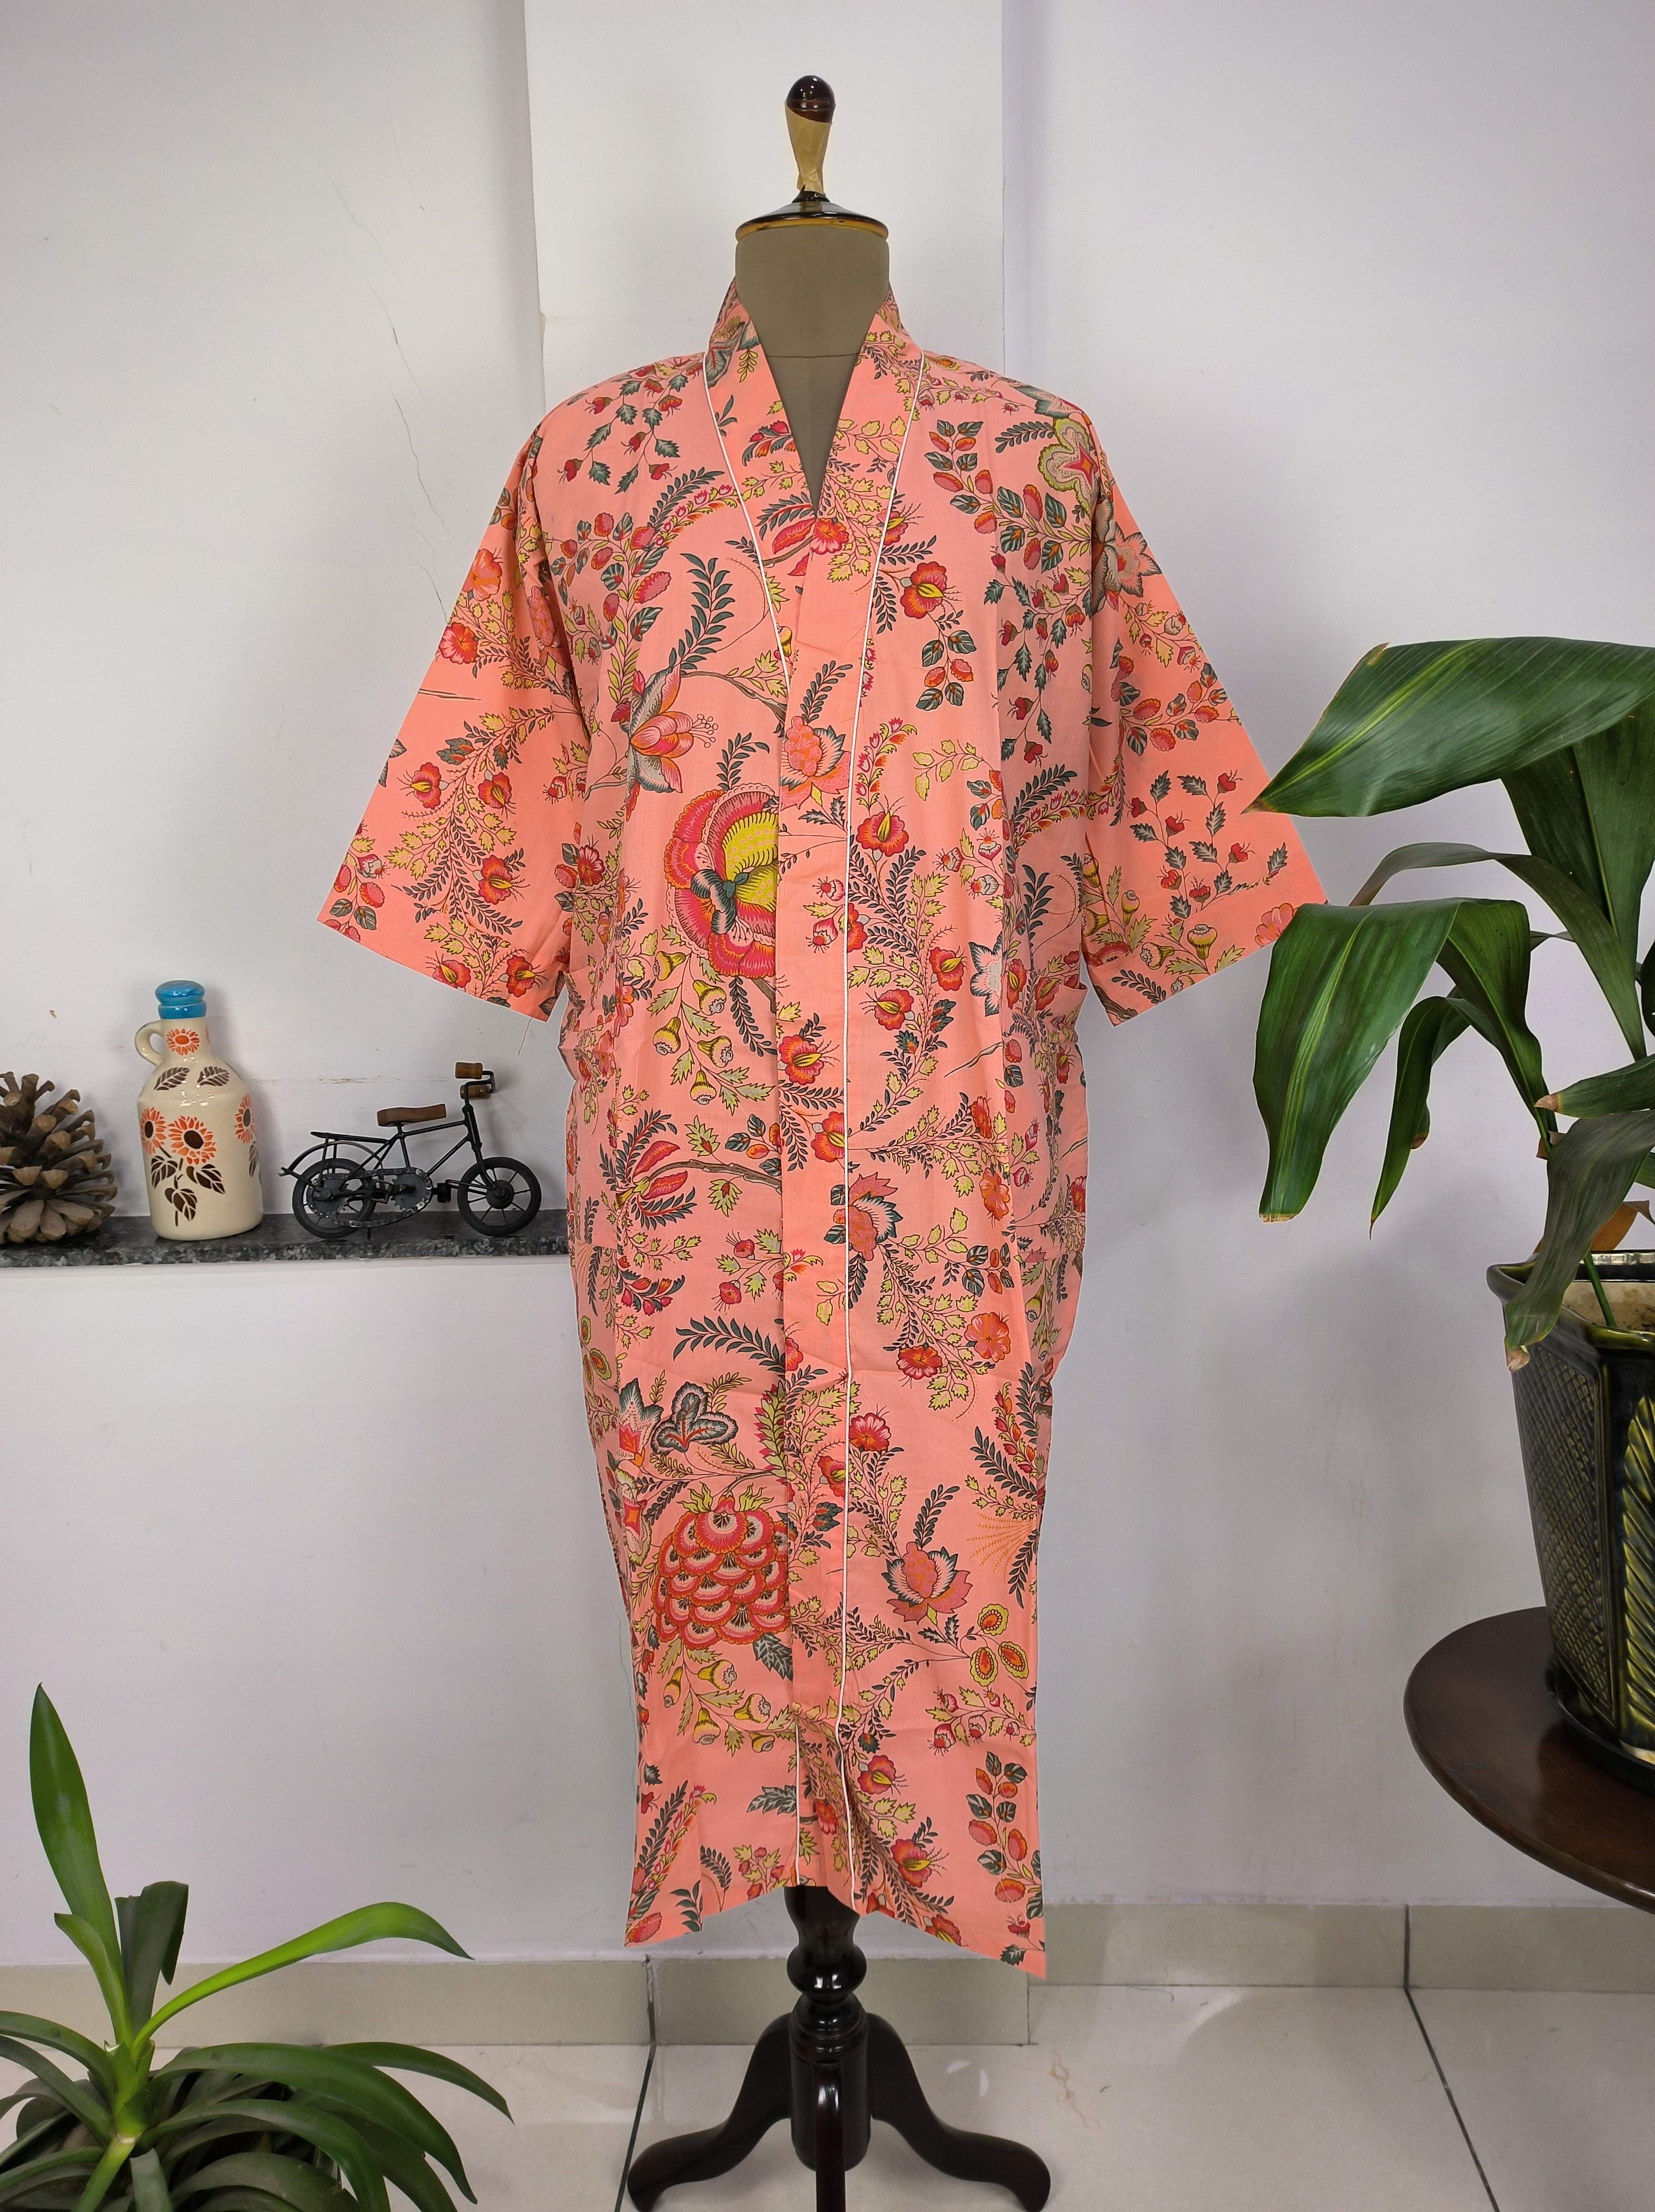 Pure Cotton Kimono Indian Handprinted Boho House Robe Summer Dress | Peach Red Floral Beach Cover Up Wear | Christmas Present, Gift For Her